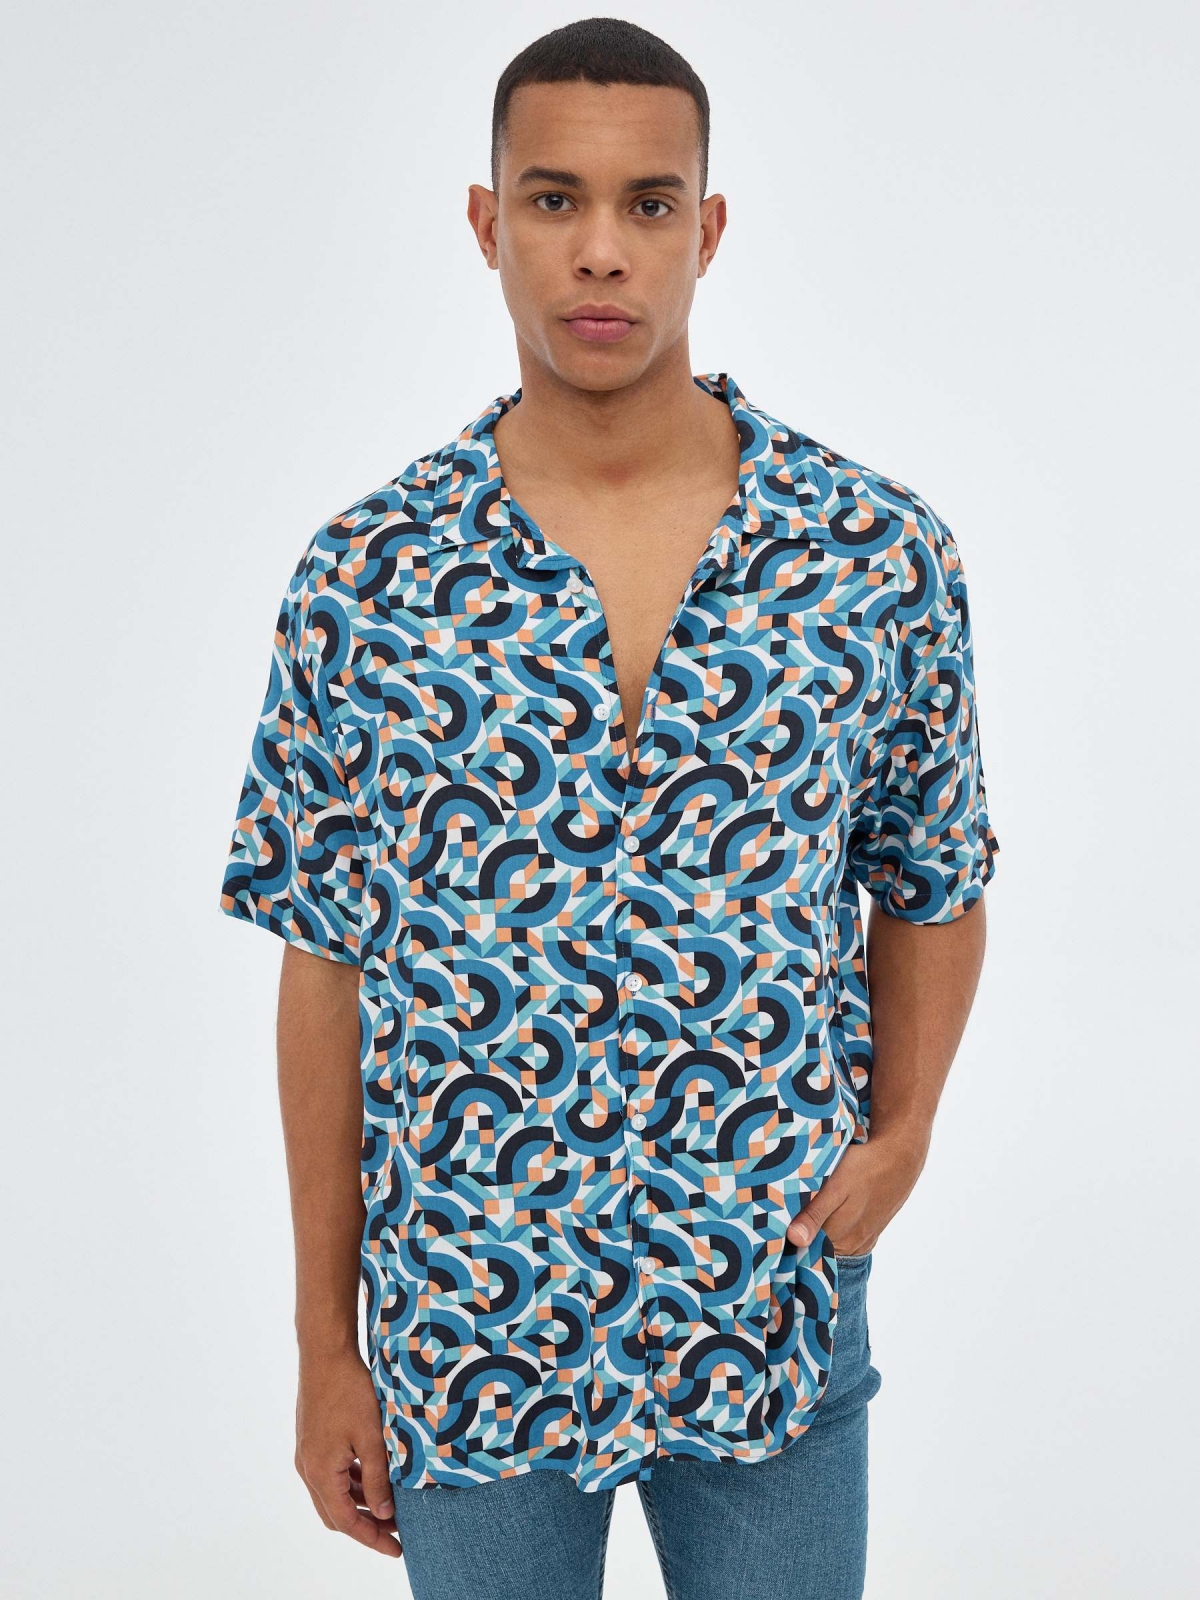 Geometric print shirt blue middle front view